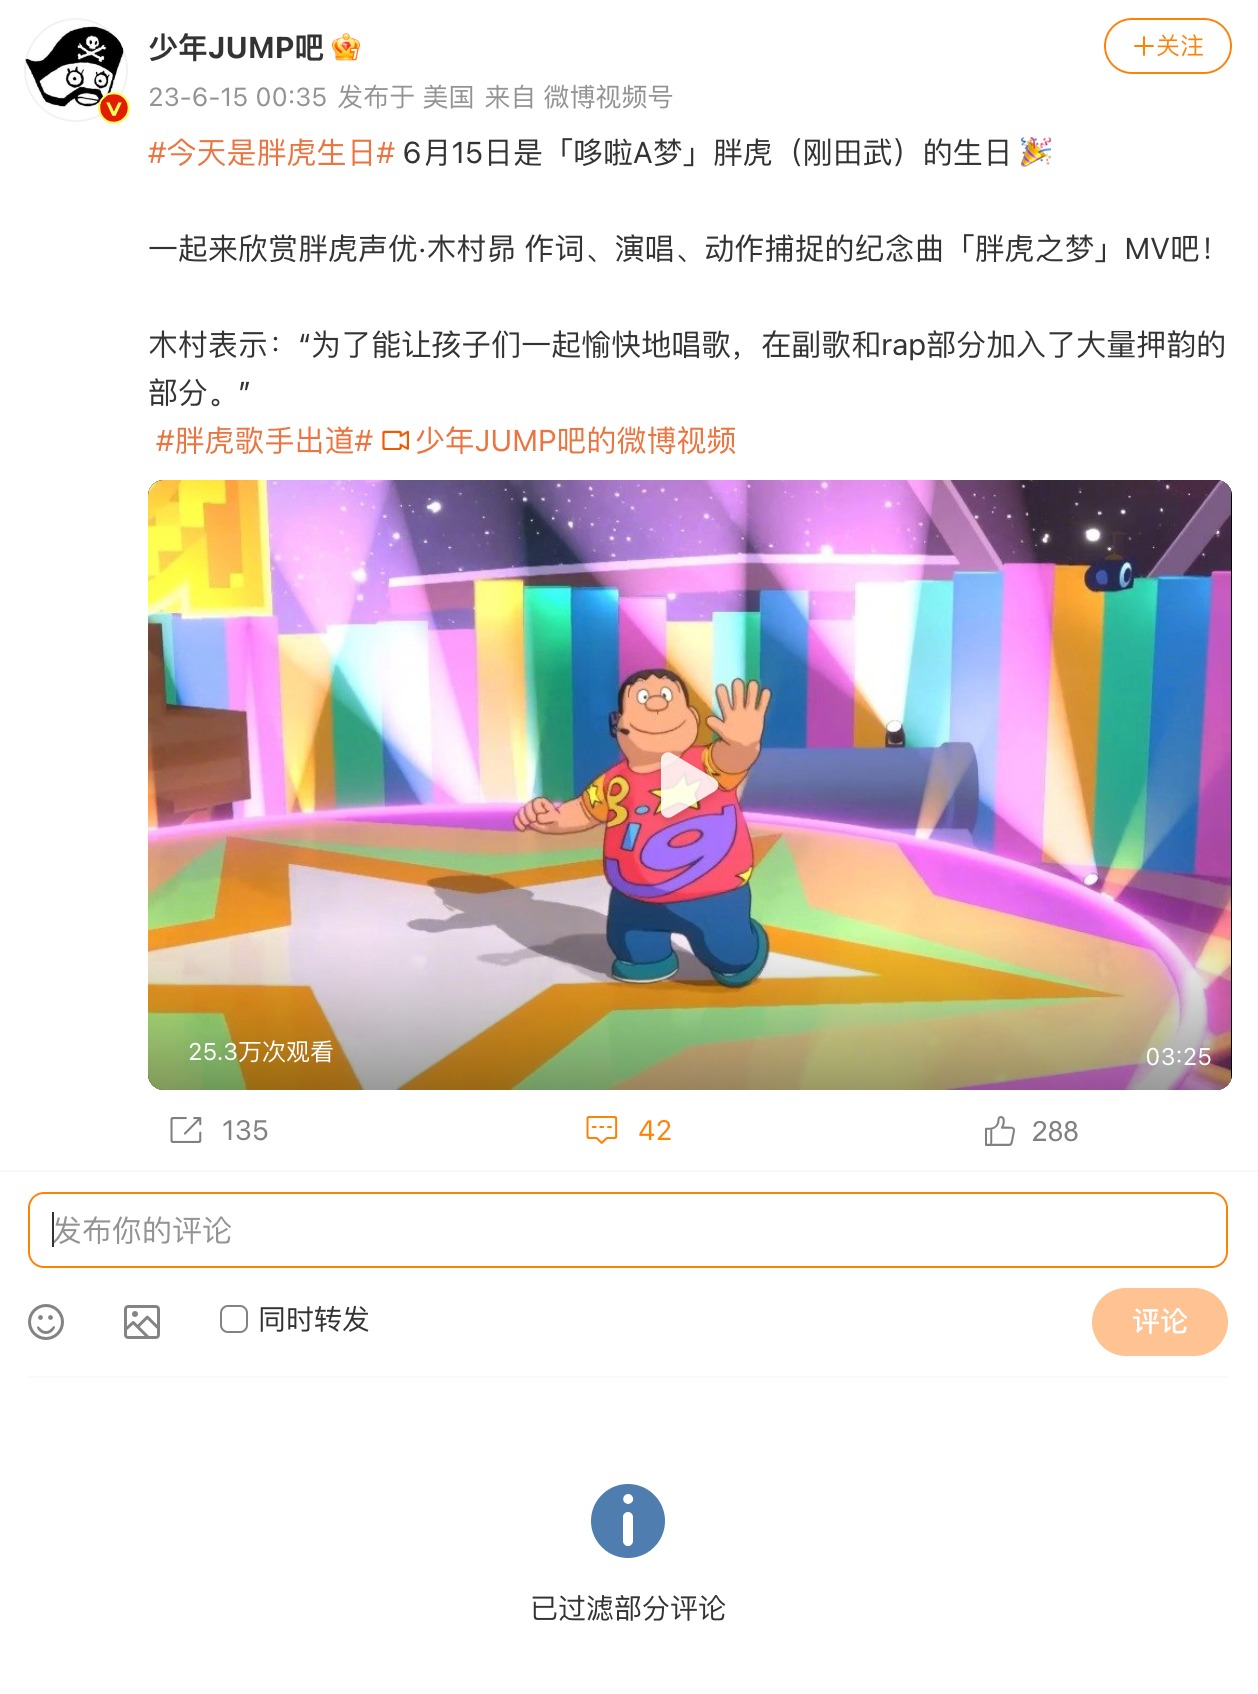 A screenshot of a Weibo post's censored comment section. 